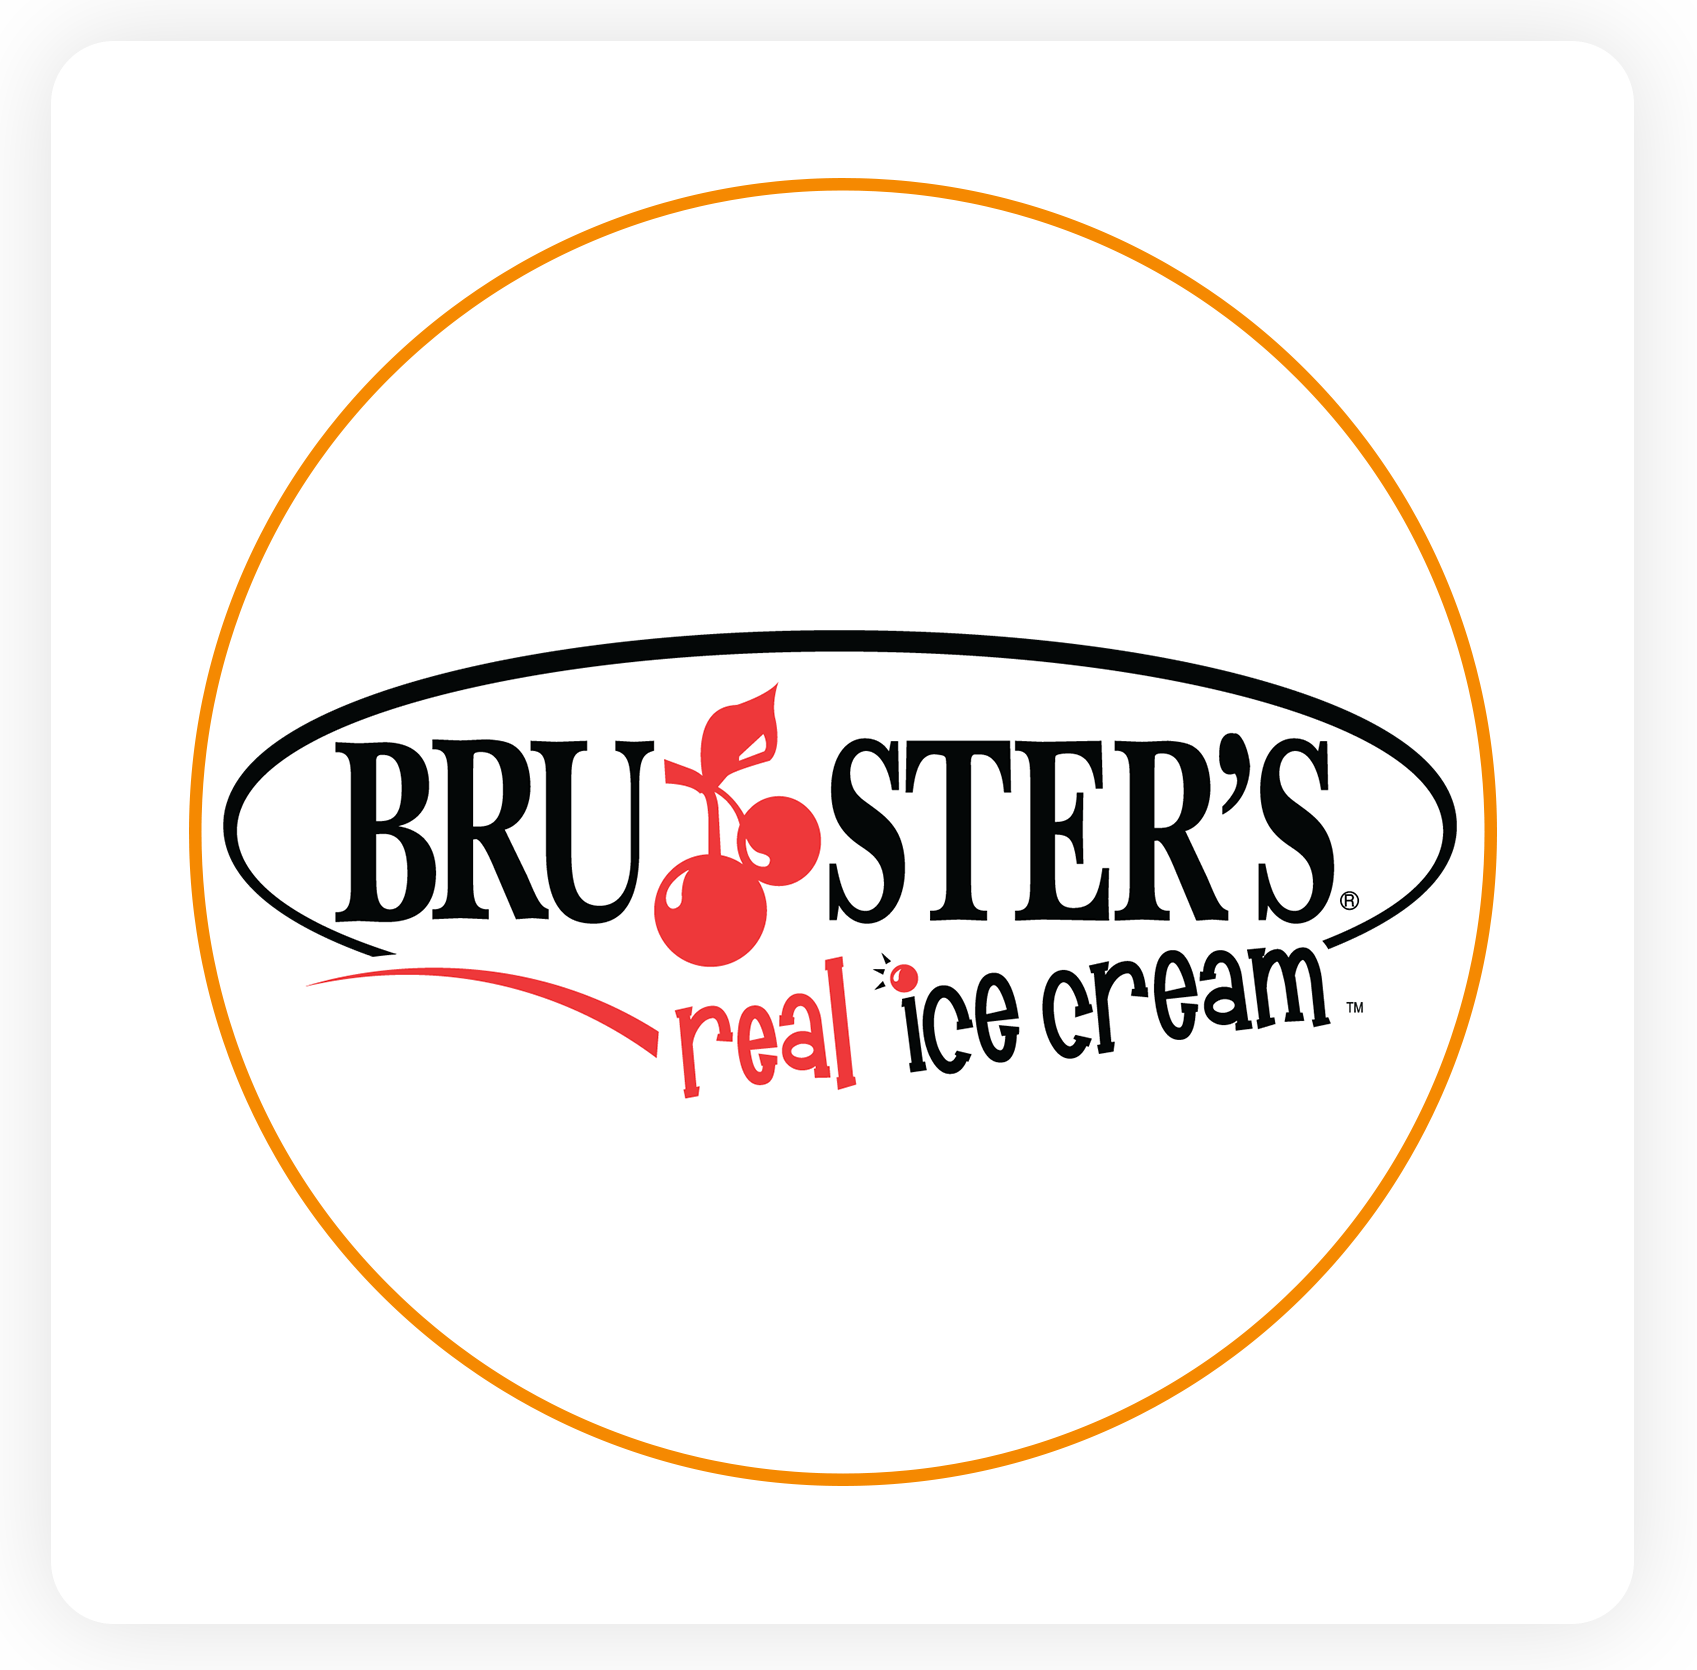 Buster real ice cream